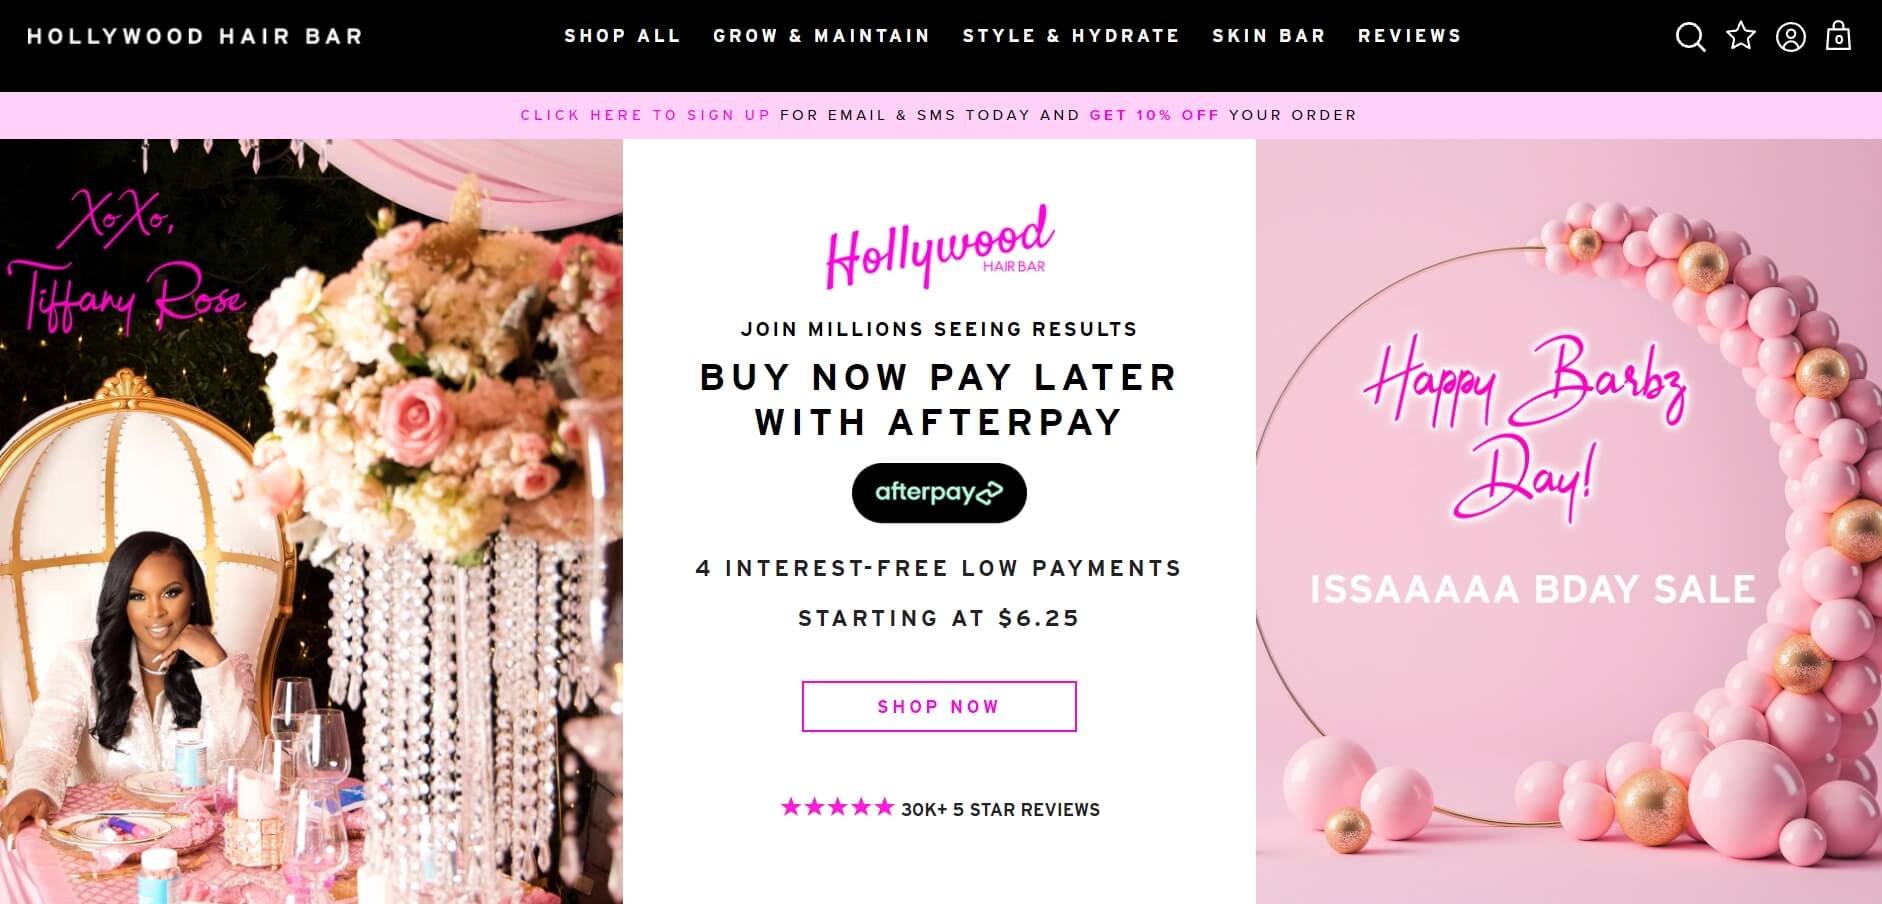 HHB– Hollywood Hair Bar on ReadSomeReviews